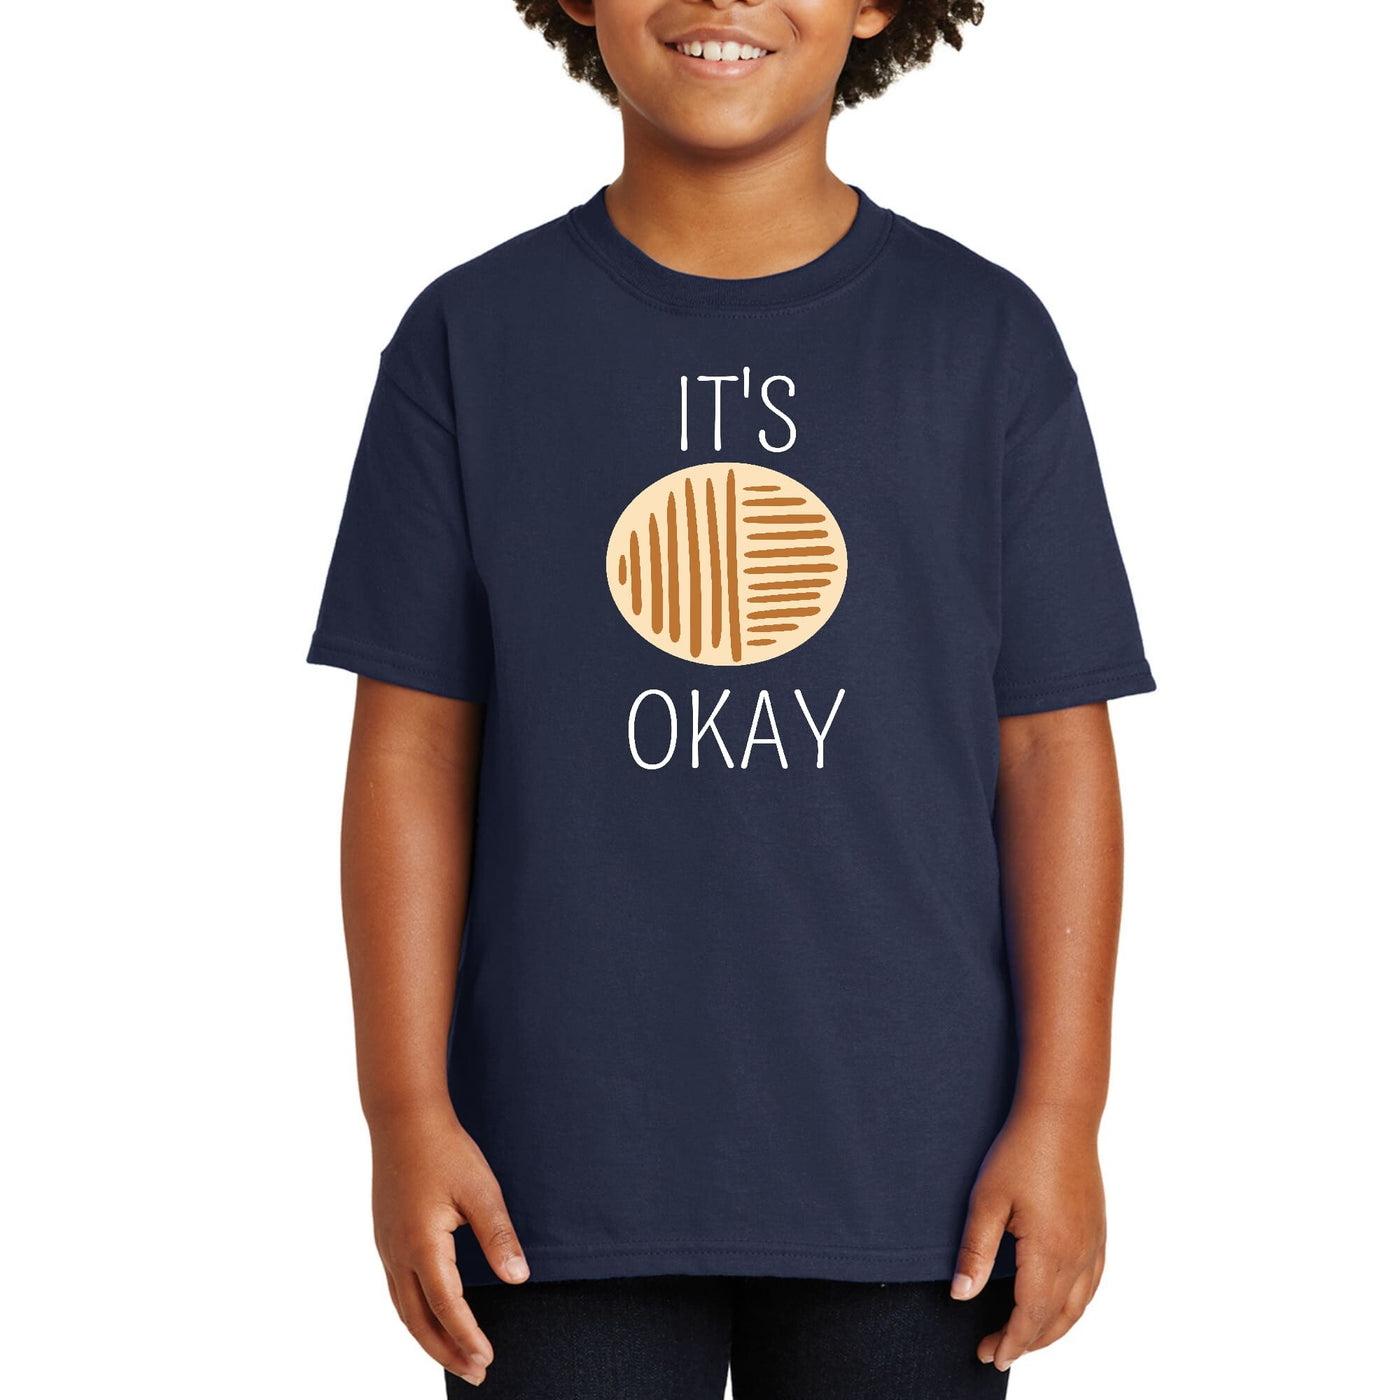 Youth Graphic T-Shirt Say It Soul Its Okay White And Brown Line - Youth